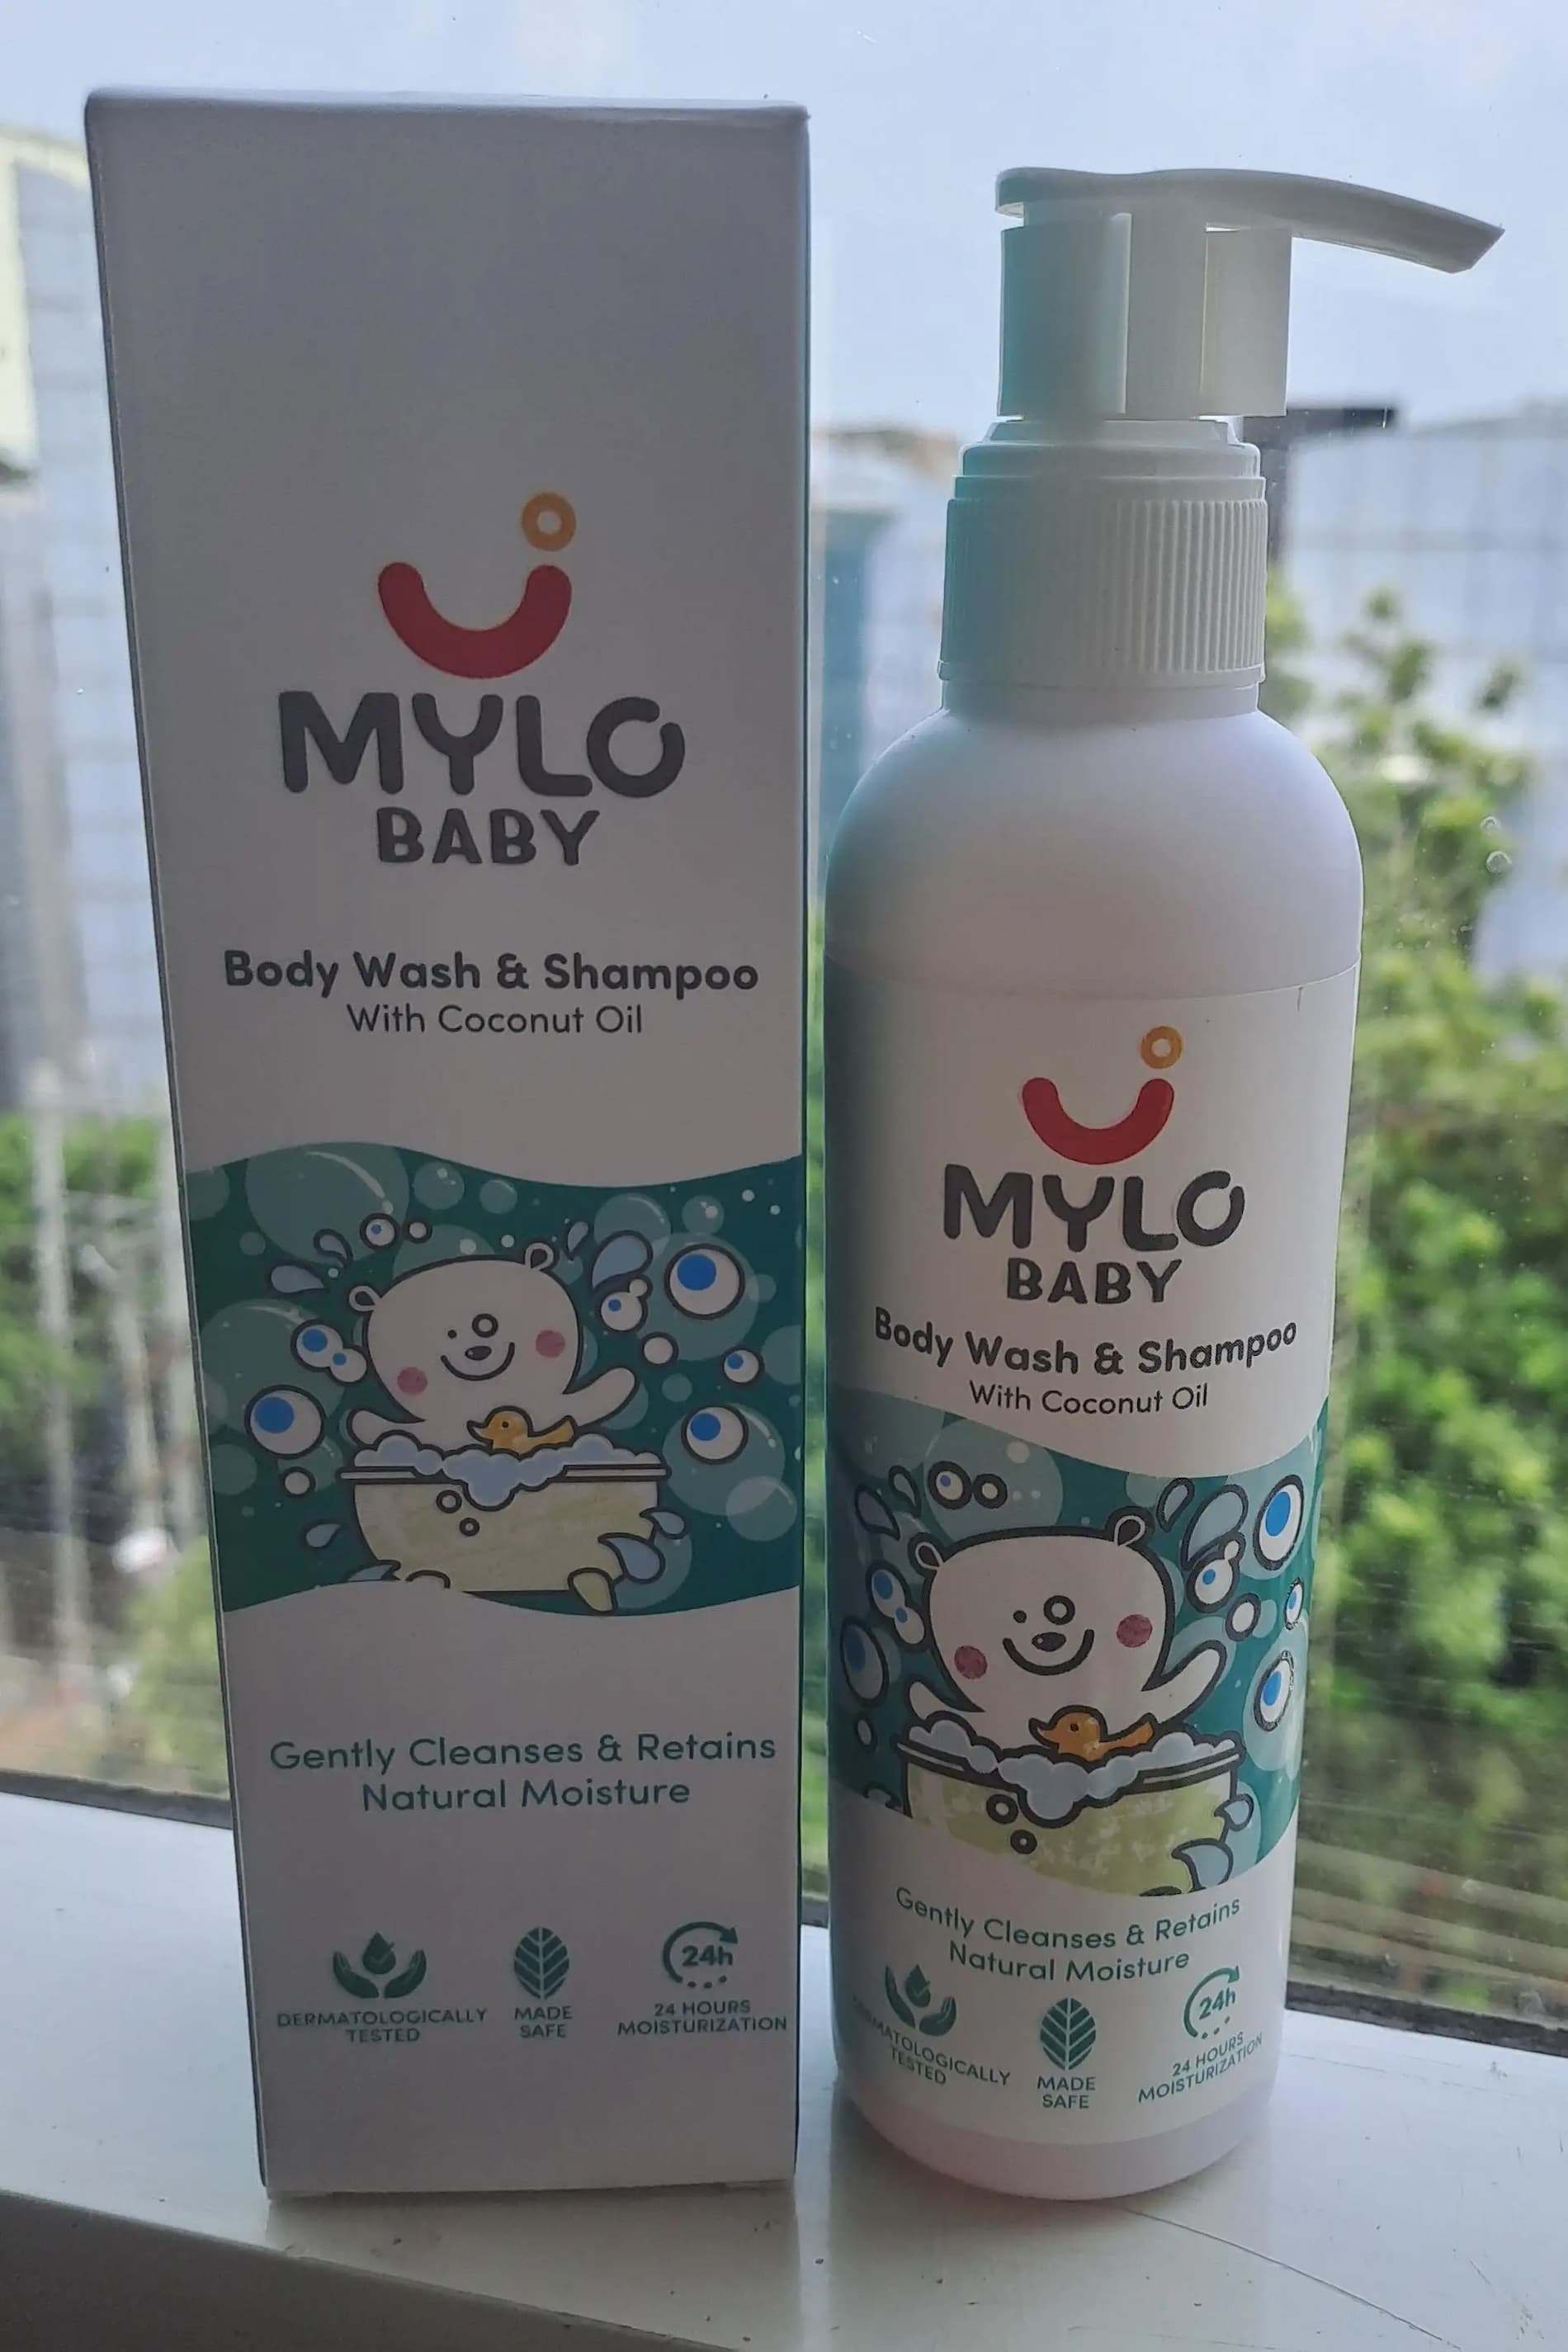 Baby Shampoo and Body Wash | Gentle Cleansing Head-to-Toe | Tear Free Formulation | Retains Natural Moisture | Dermatologically Tested | Made Safe Certified- 200 ml